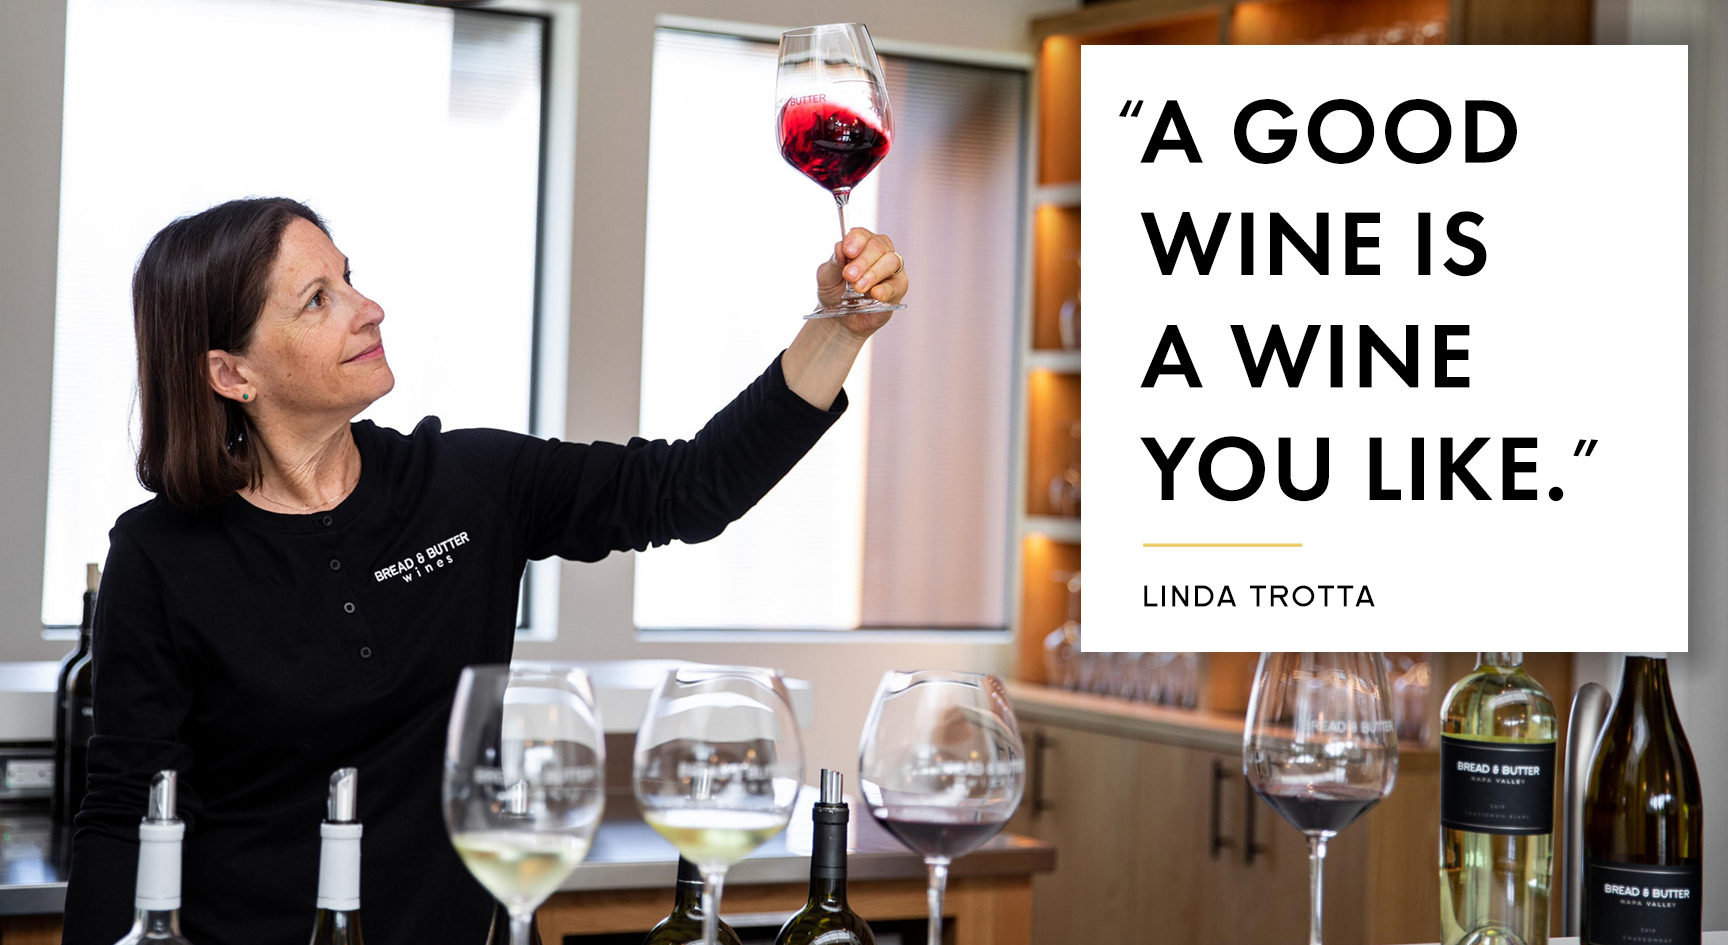 Bread & Butter Winemaker Linda Trotta swirling a glass of red wine in the air at the Bread & Butter Tasting Room in Napa Valley with the quote, "A good wine is a wine you like." – Linda Trotta